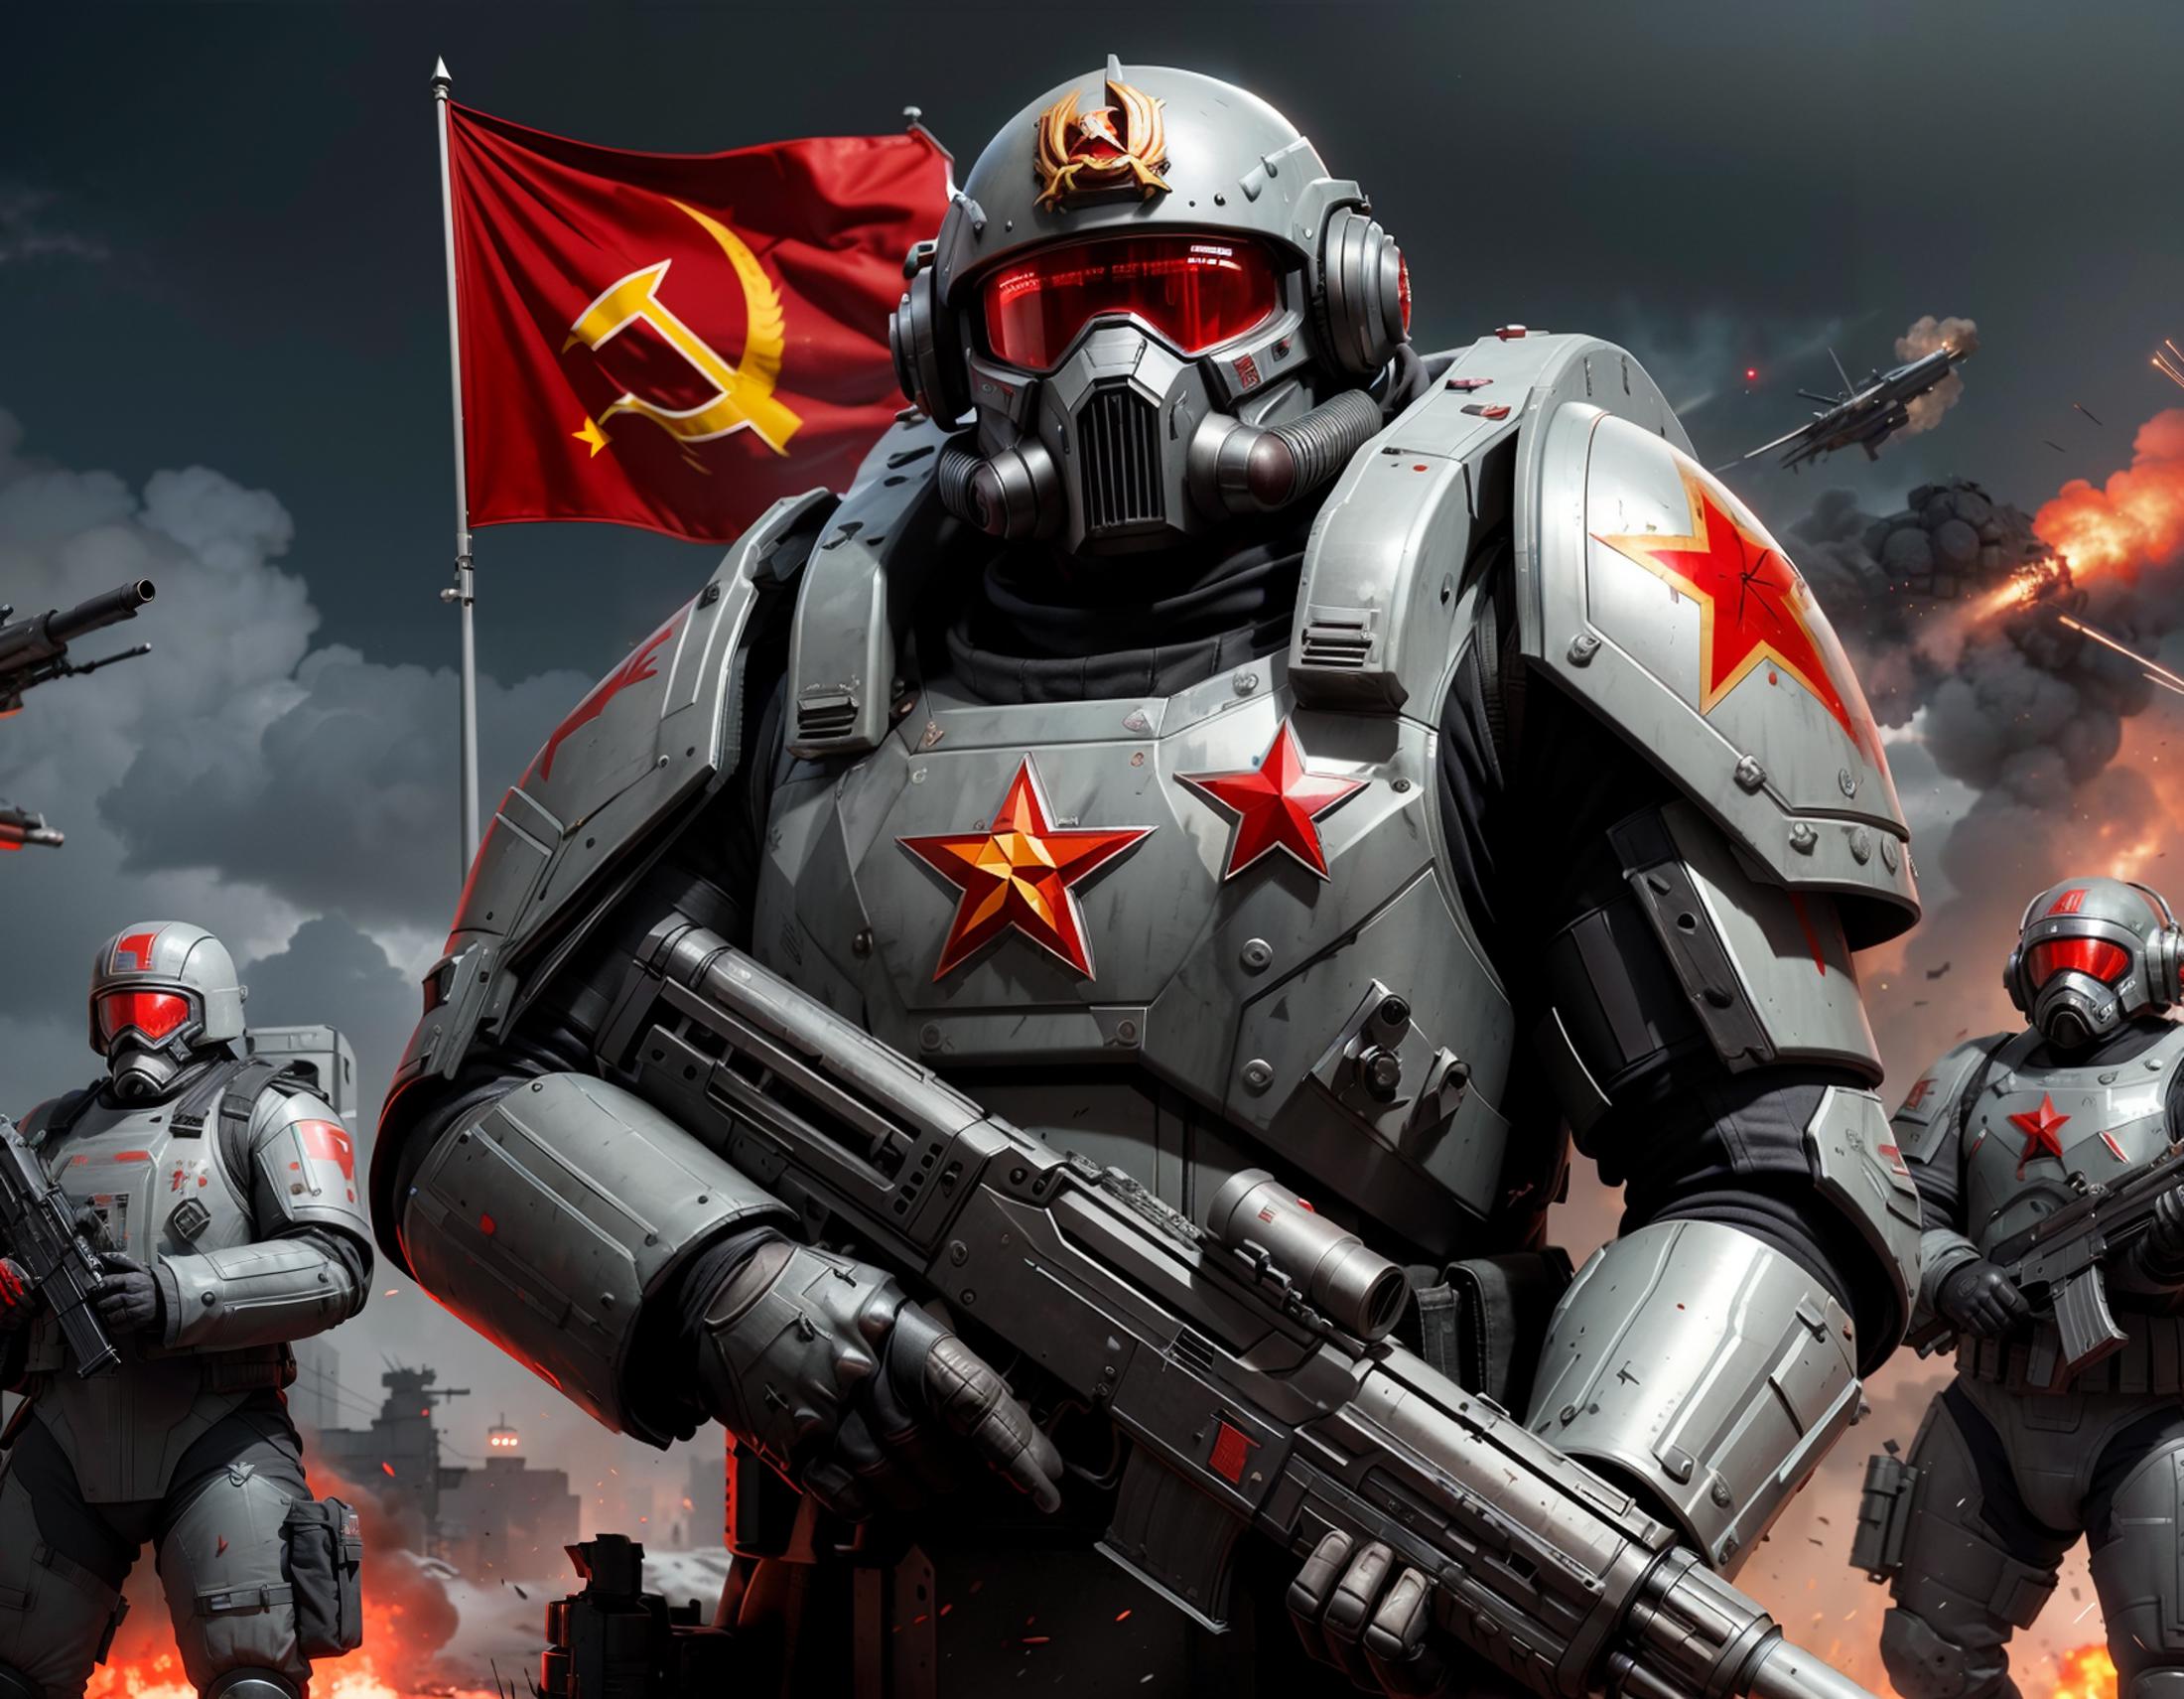 Robotic Soldier in Armor with Red Communist Flag in Background